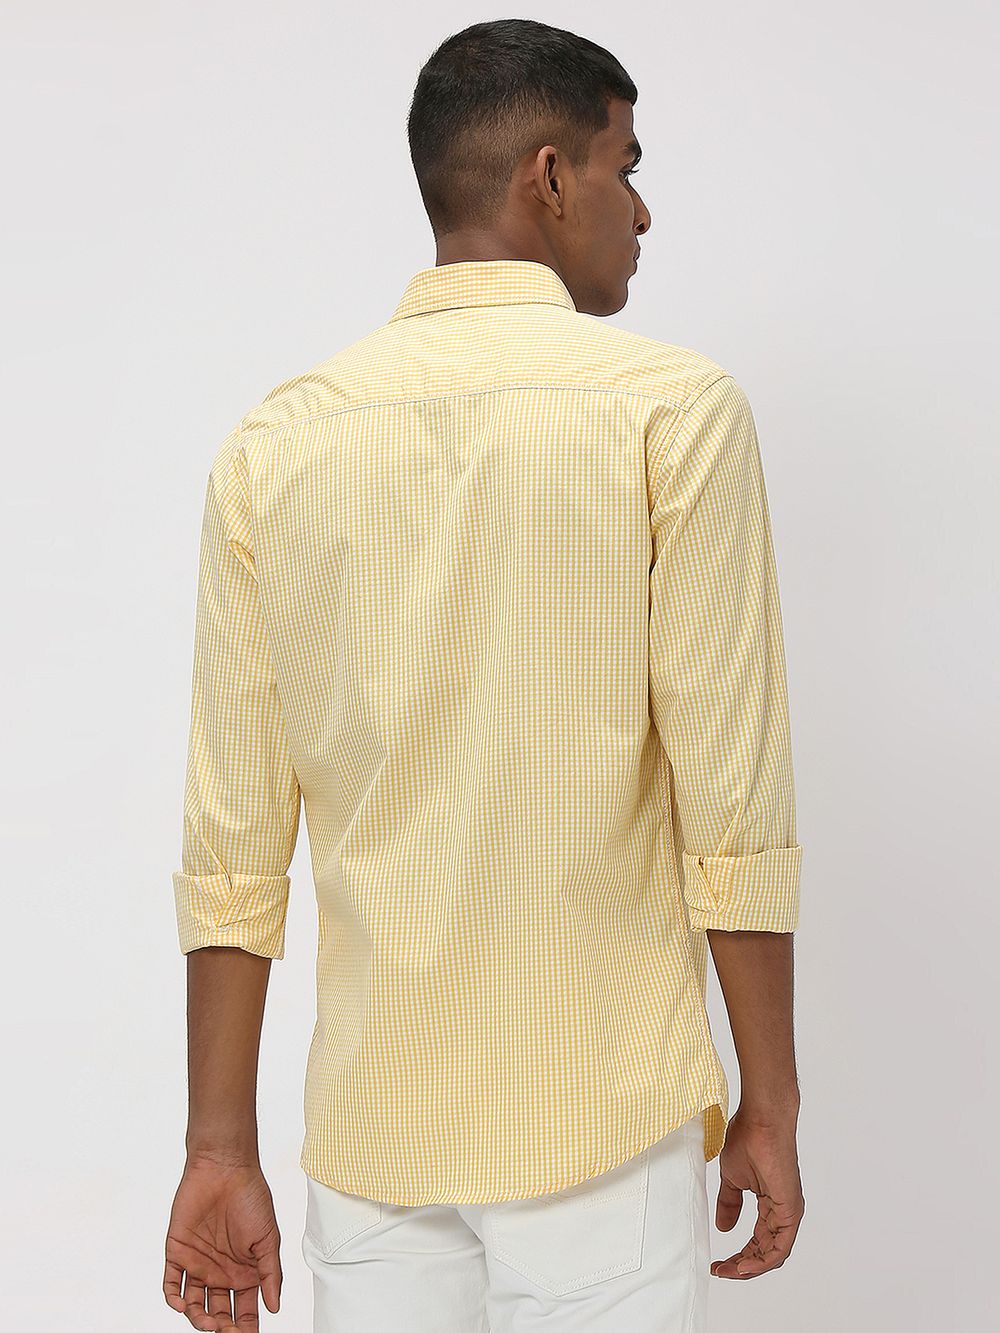 Yellow & White Gingham Check Slim Fit Casual Shirt